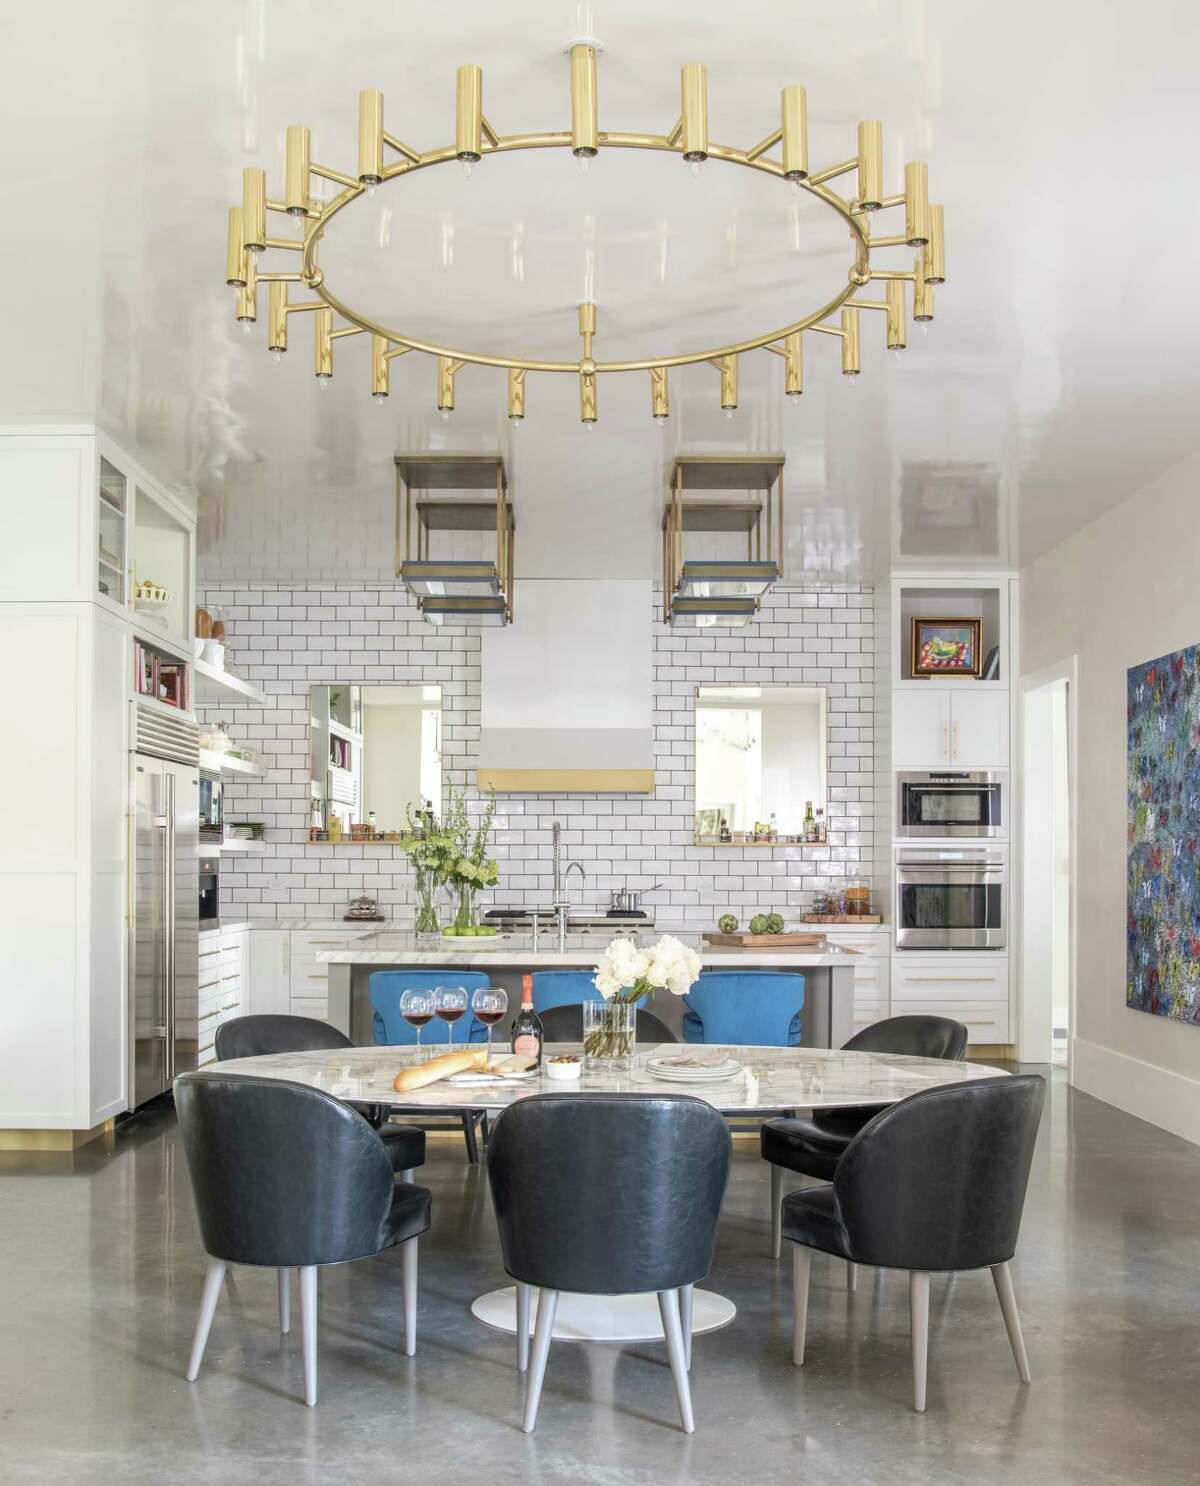 The Orens' home is filled with dramatic lighting, including these gold fixtures in the dining area and kitchen. Gold has been a big trend in lighting and in interior design in 2018.